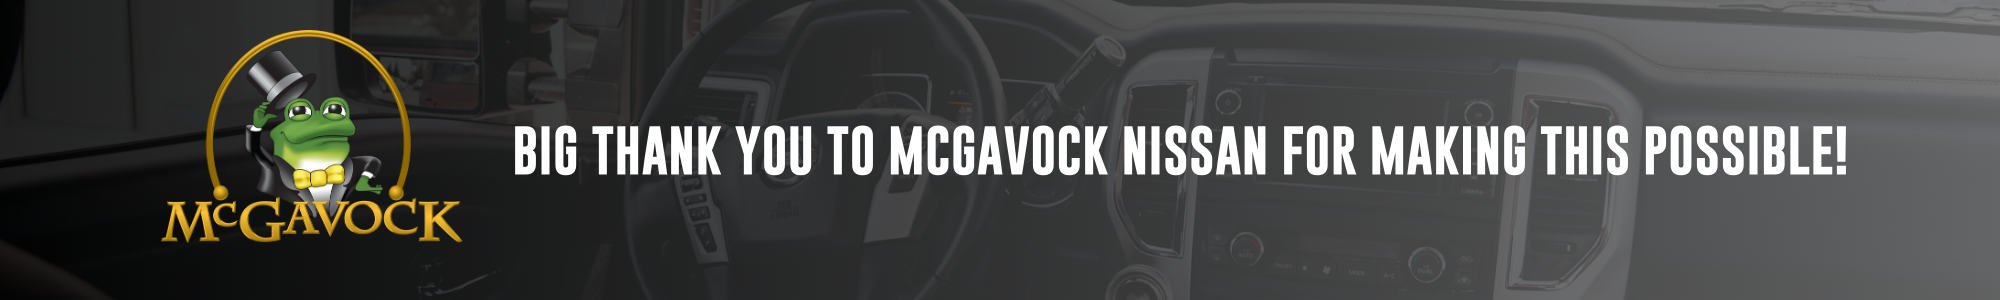 BIG THANK YOU TO MCGAVOCK NISSAN FOR MAKING THIS POSSIBLE! (1000 × 200 px) (2000 × 300 px) (1)